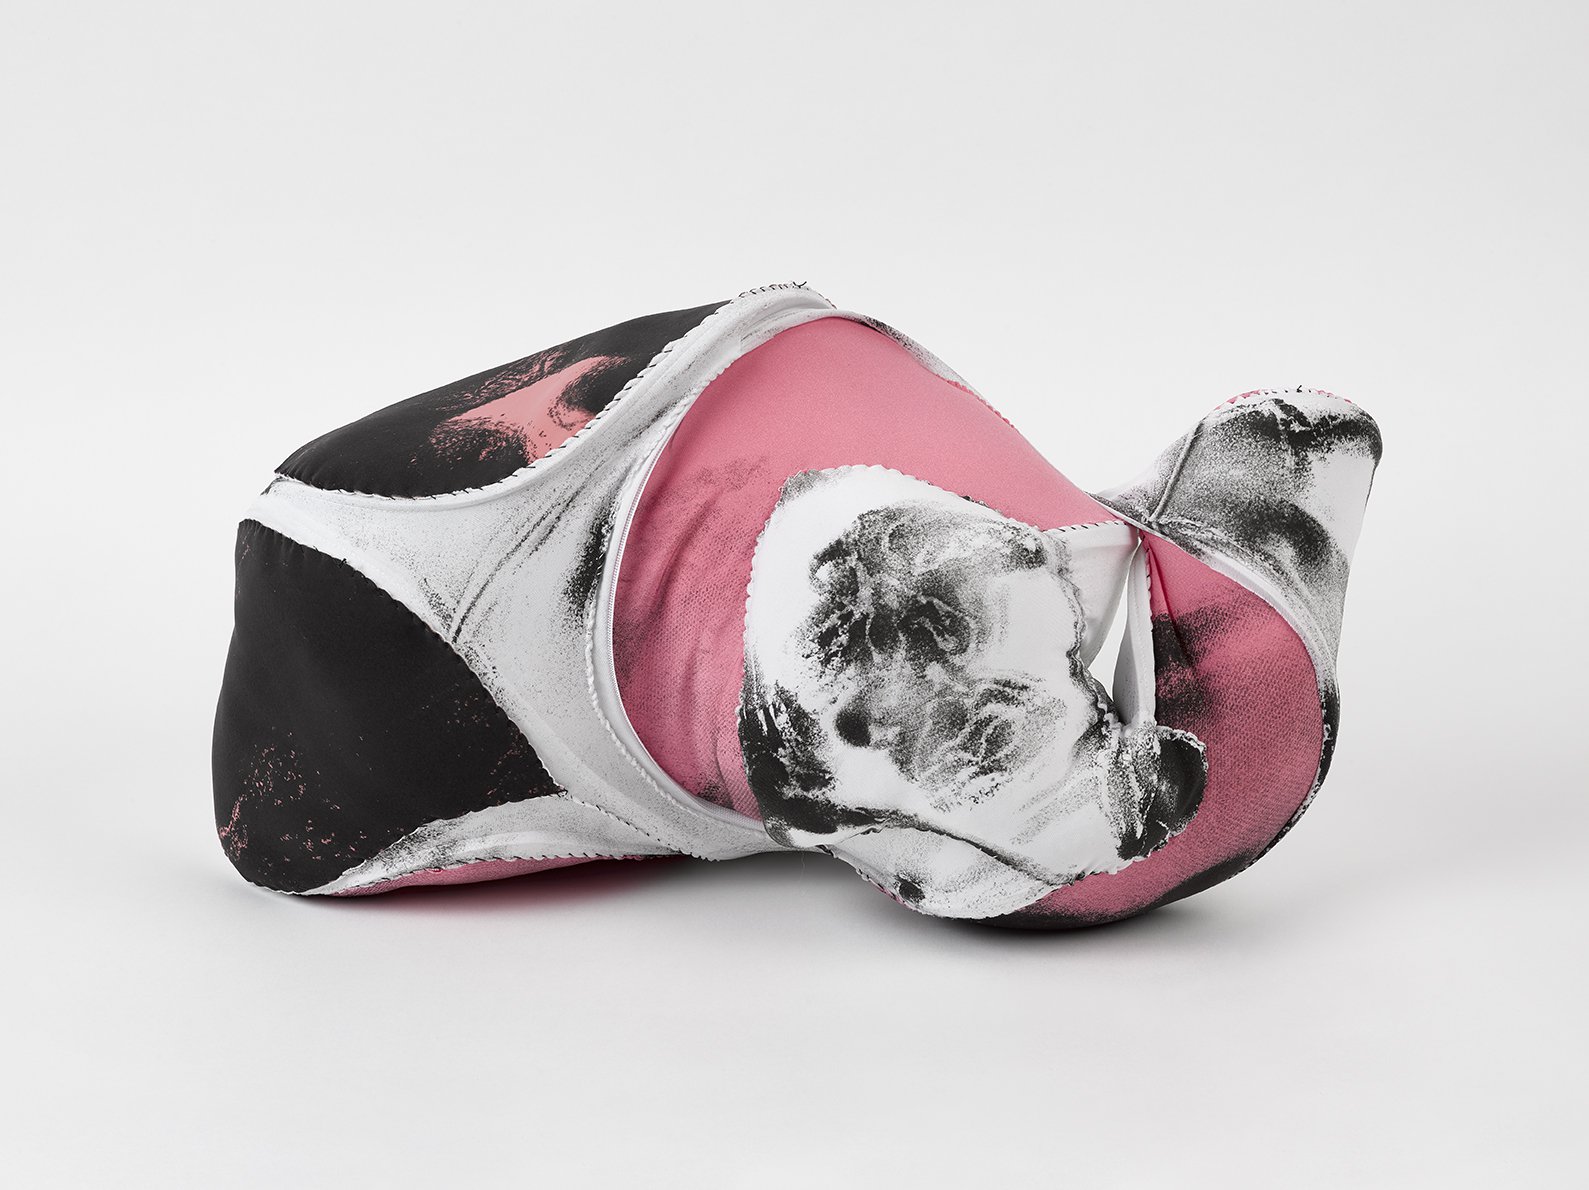 Angela Brandys, Knickers in a Twist, 2020. Printed textile, mixed media, 50 x 25 cm.Courtesy of the artist and Anaïs Lellouche. Photo: Jack Hems.